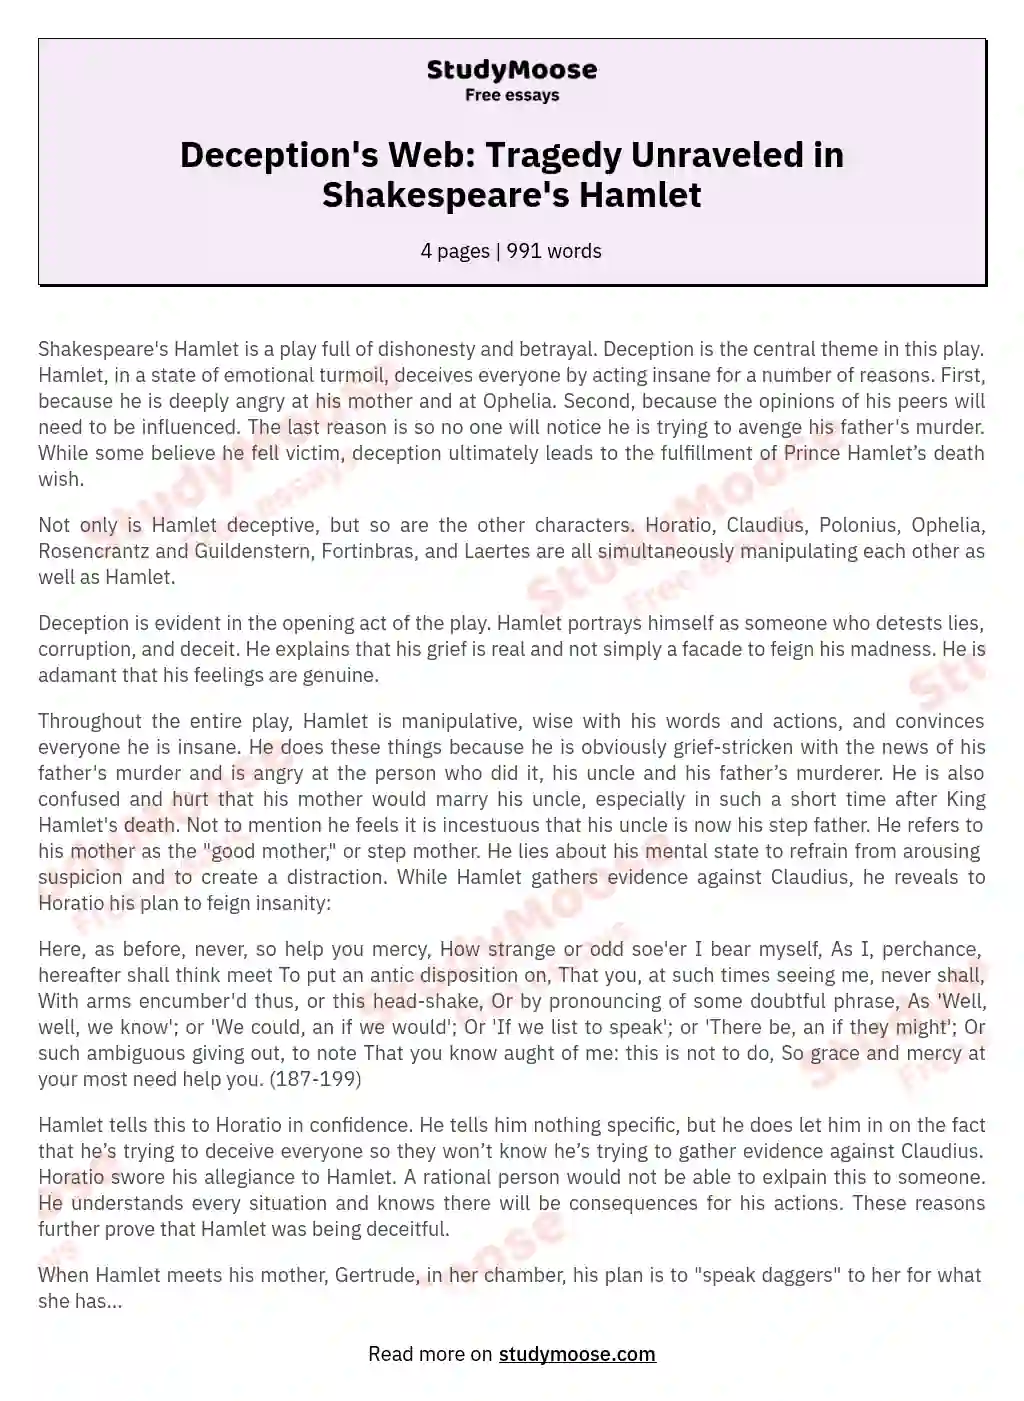 Deception's Web: Tragedy Unraveled in Shakespeare's Hamlet essay